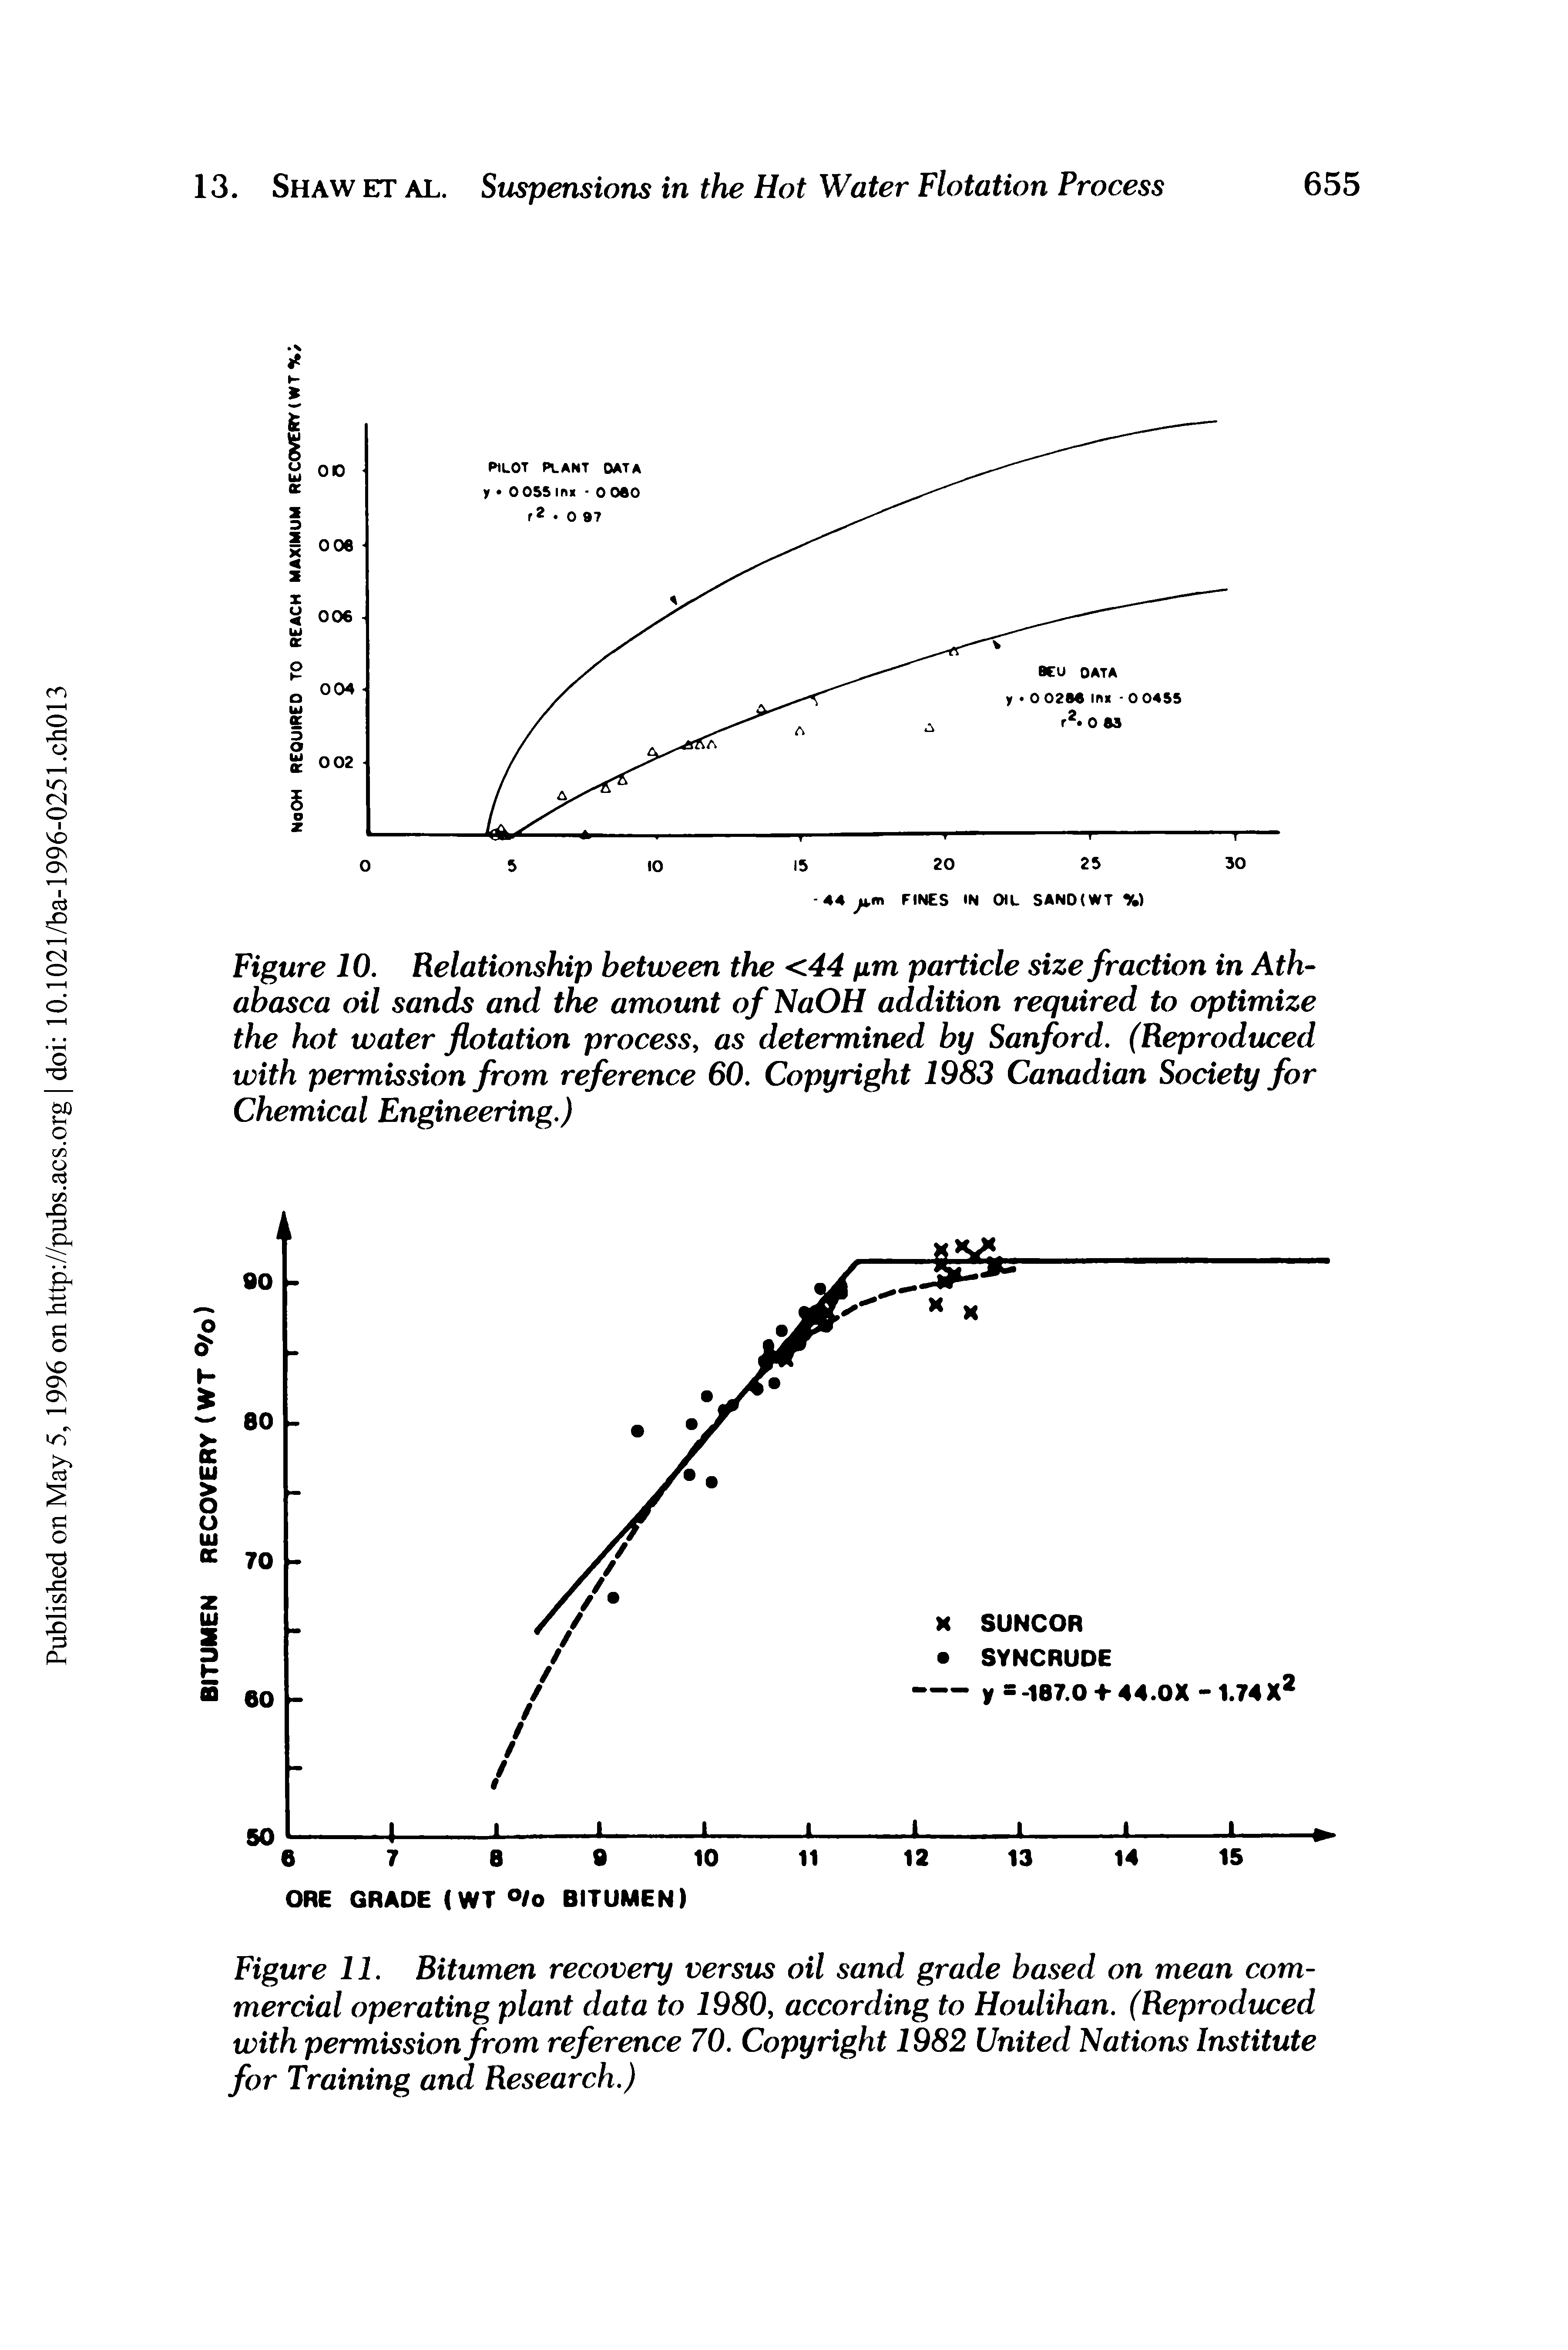 Figure 10. Relationship between the <44 pm particle size fraction in Athabasca oil sands and the amount of NaOH addition required to optimize the hot water flotation process, as determined by Sanford. (Reproduced with permission from reference 60. Copyright 1983 Canadian Society for Chemical Engineering.)...